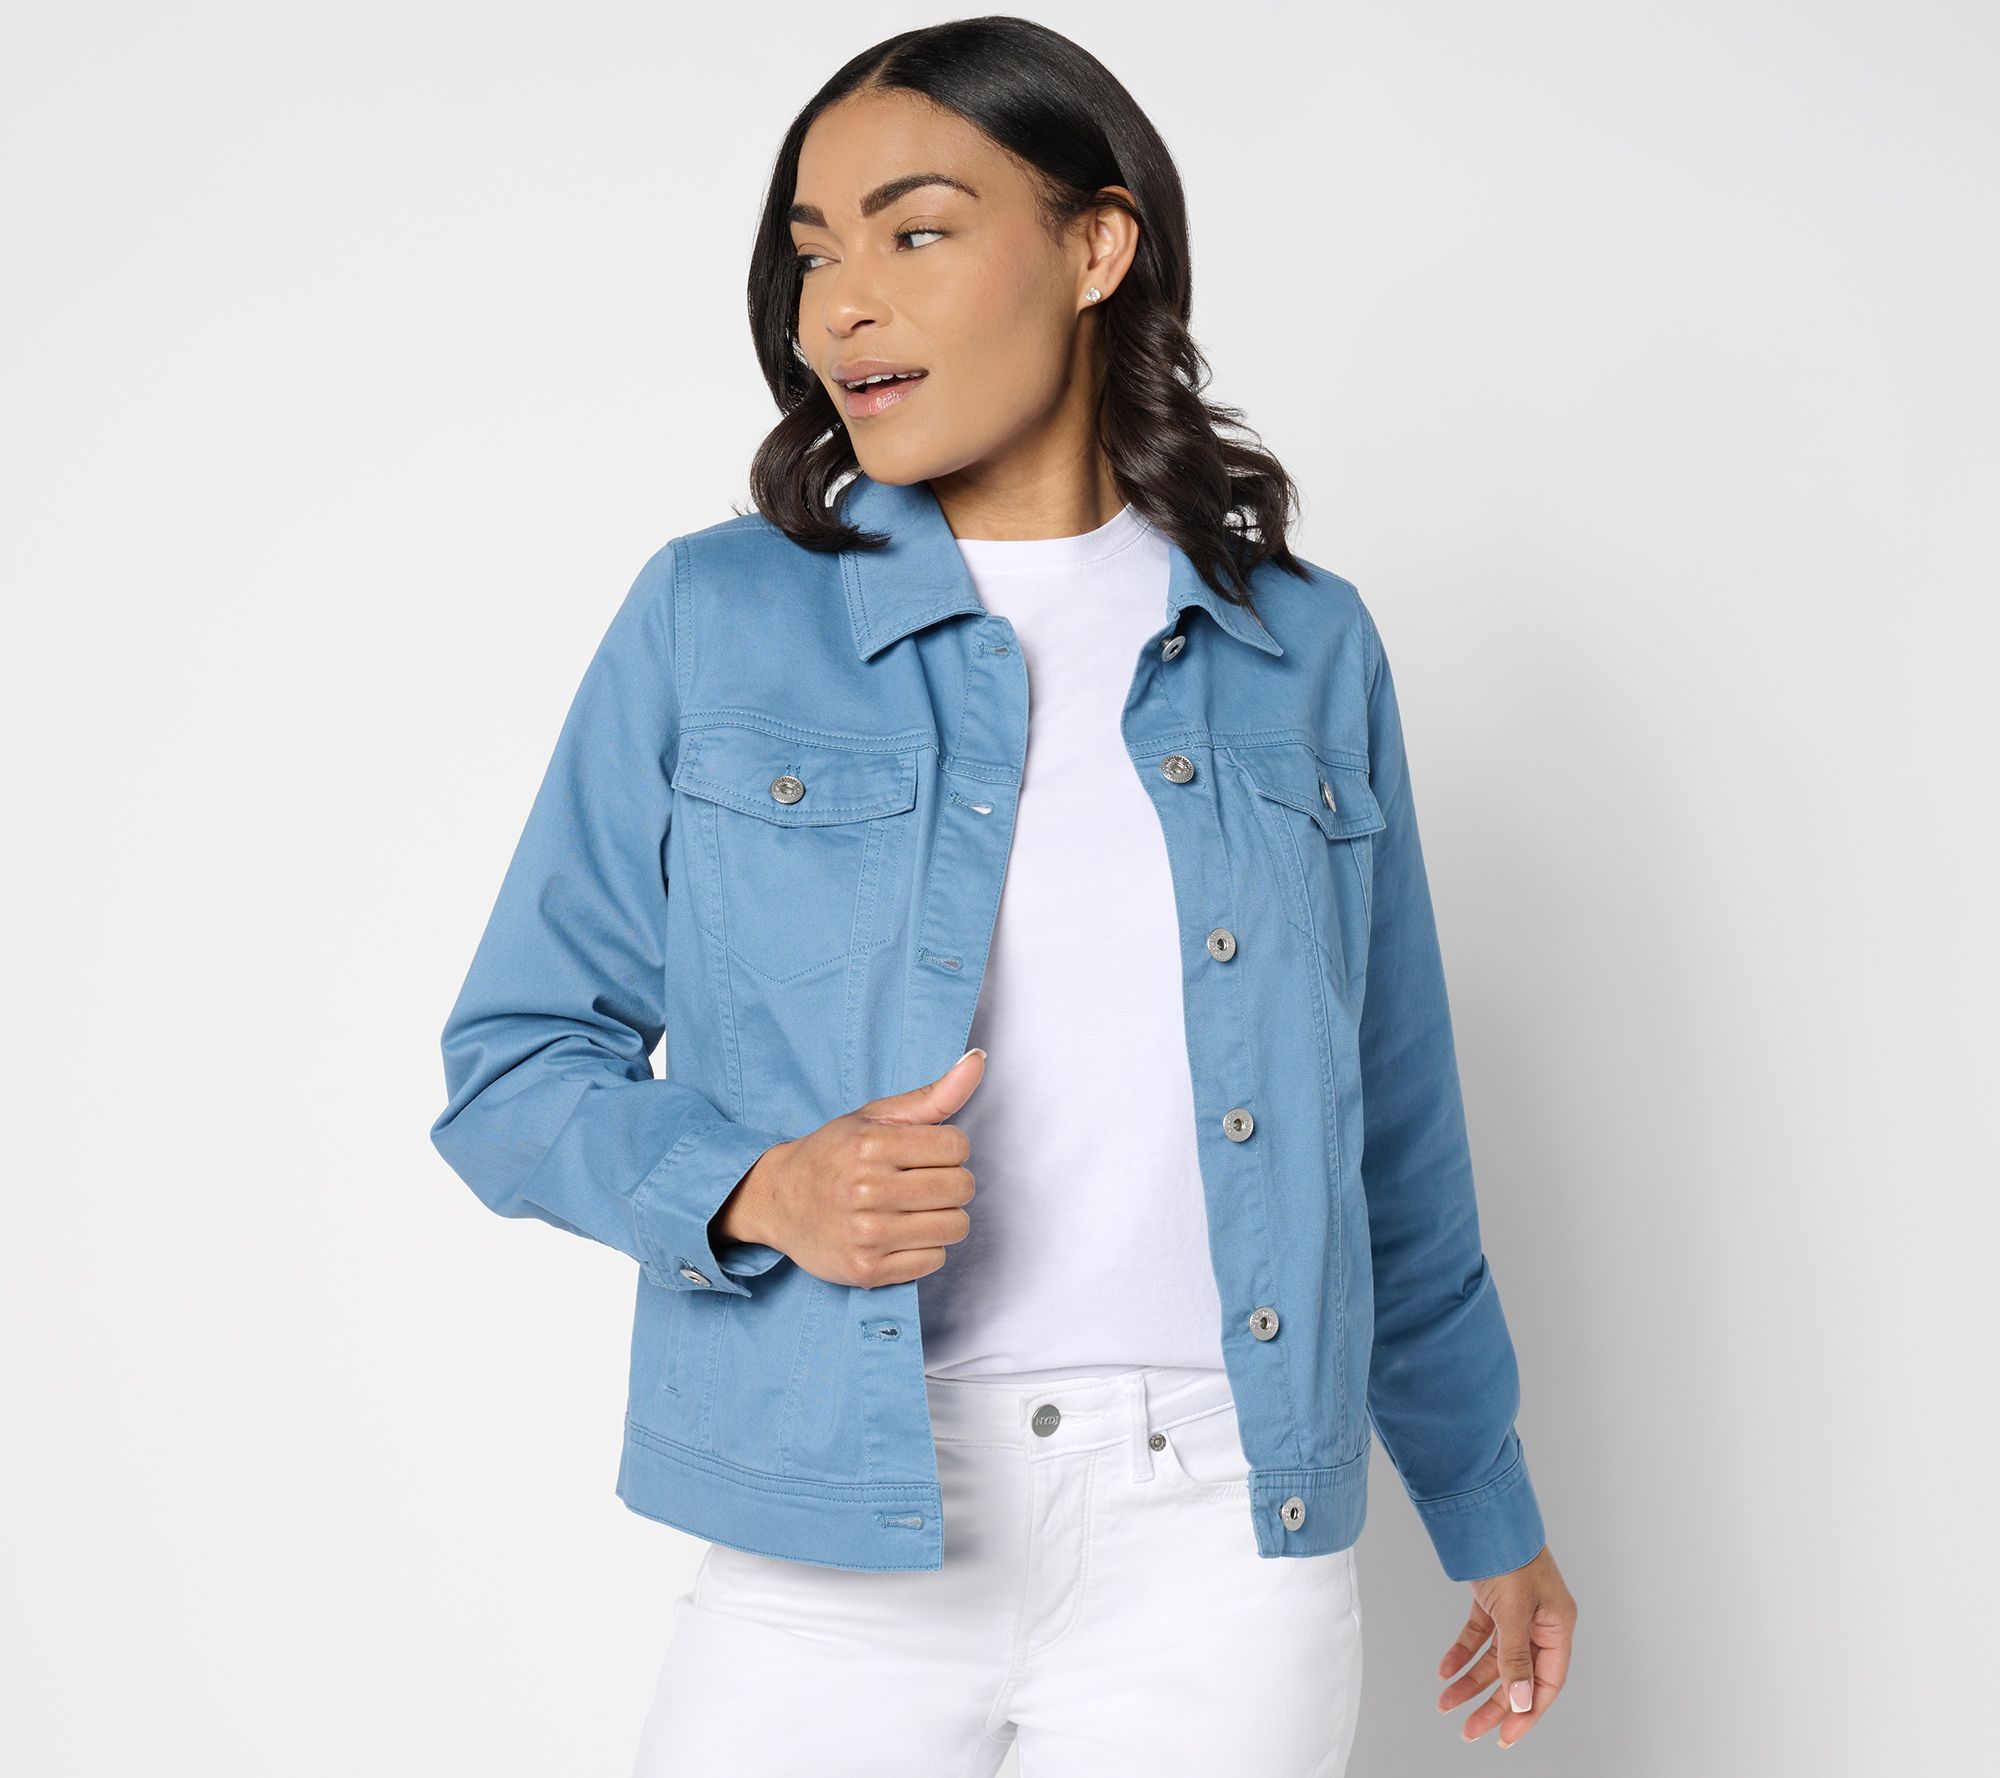 Denim & Co. EasyWear Twill Classic Button-Front Jacket - QVC.com